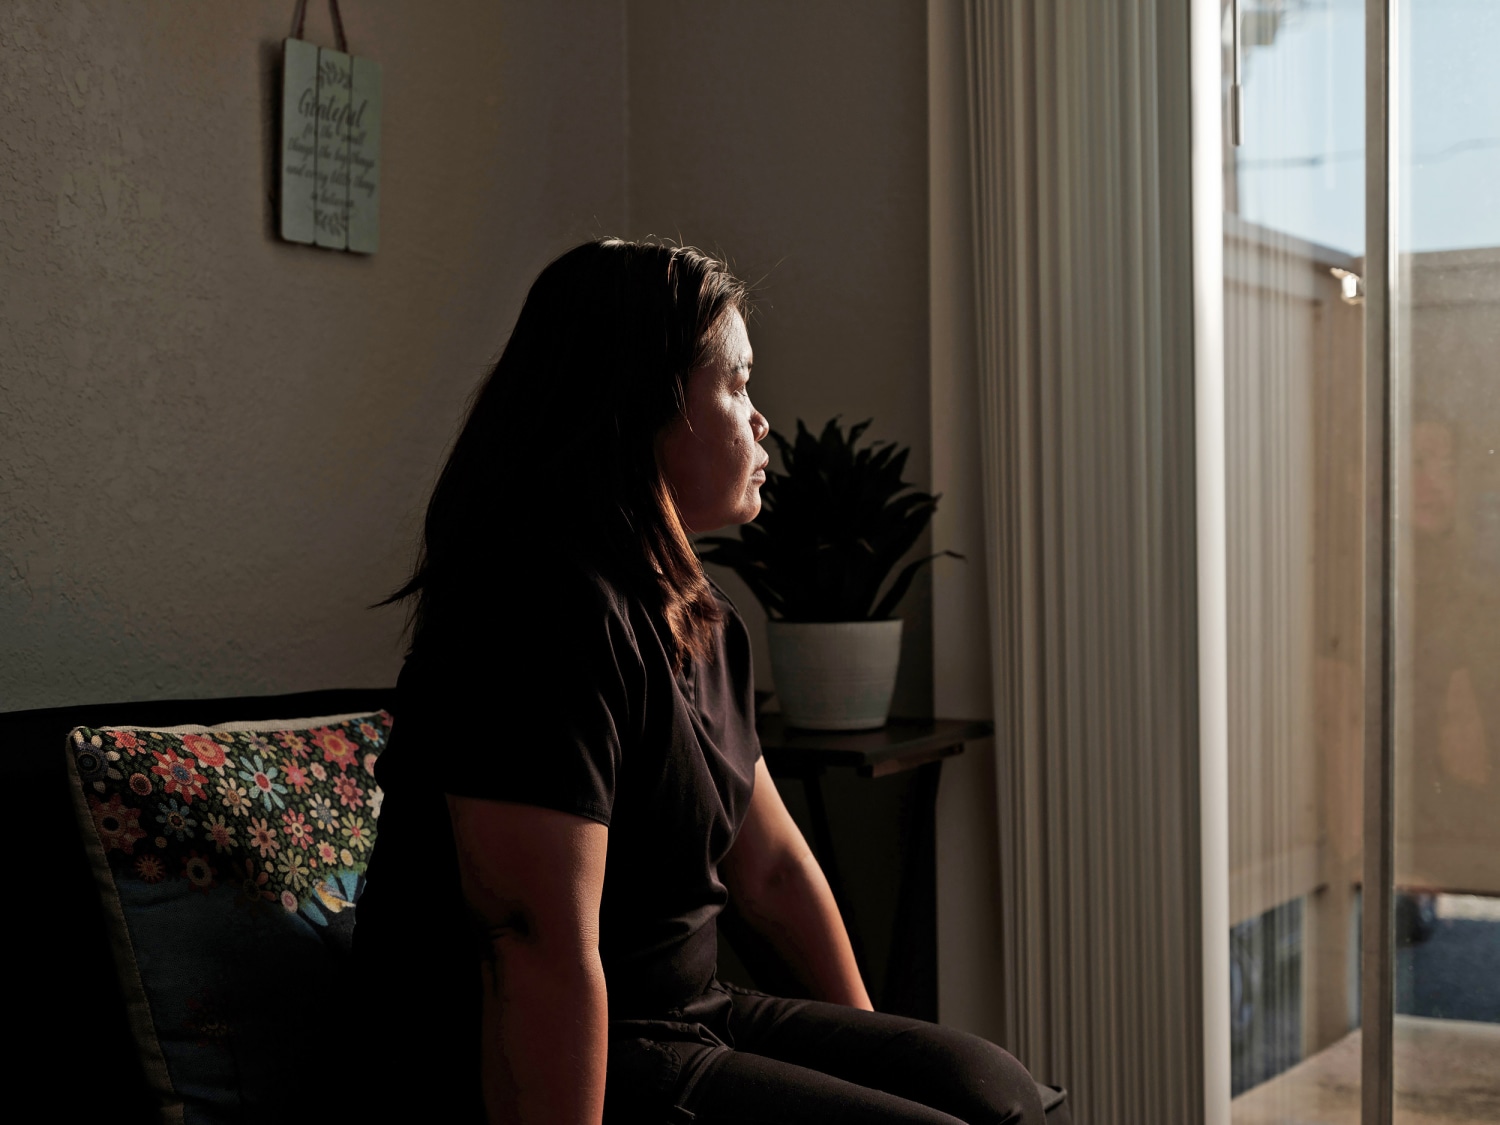 Trapped at work Immigrant health care workers can face harsh working conditions and $100,000 lawsuits for quitting